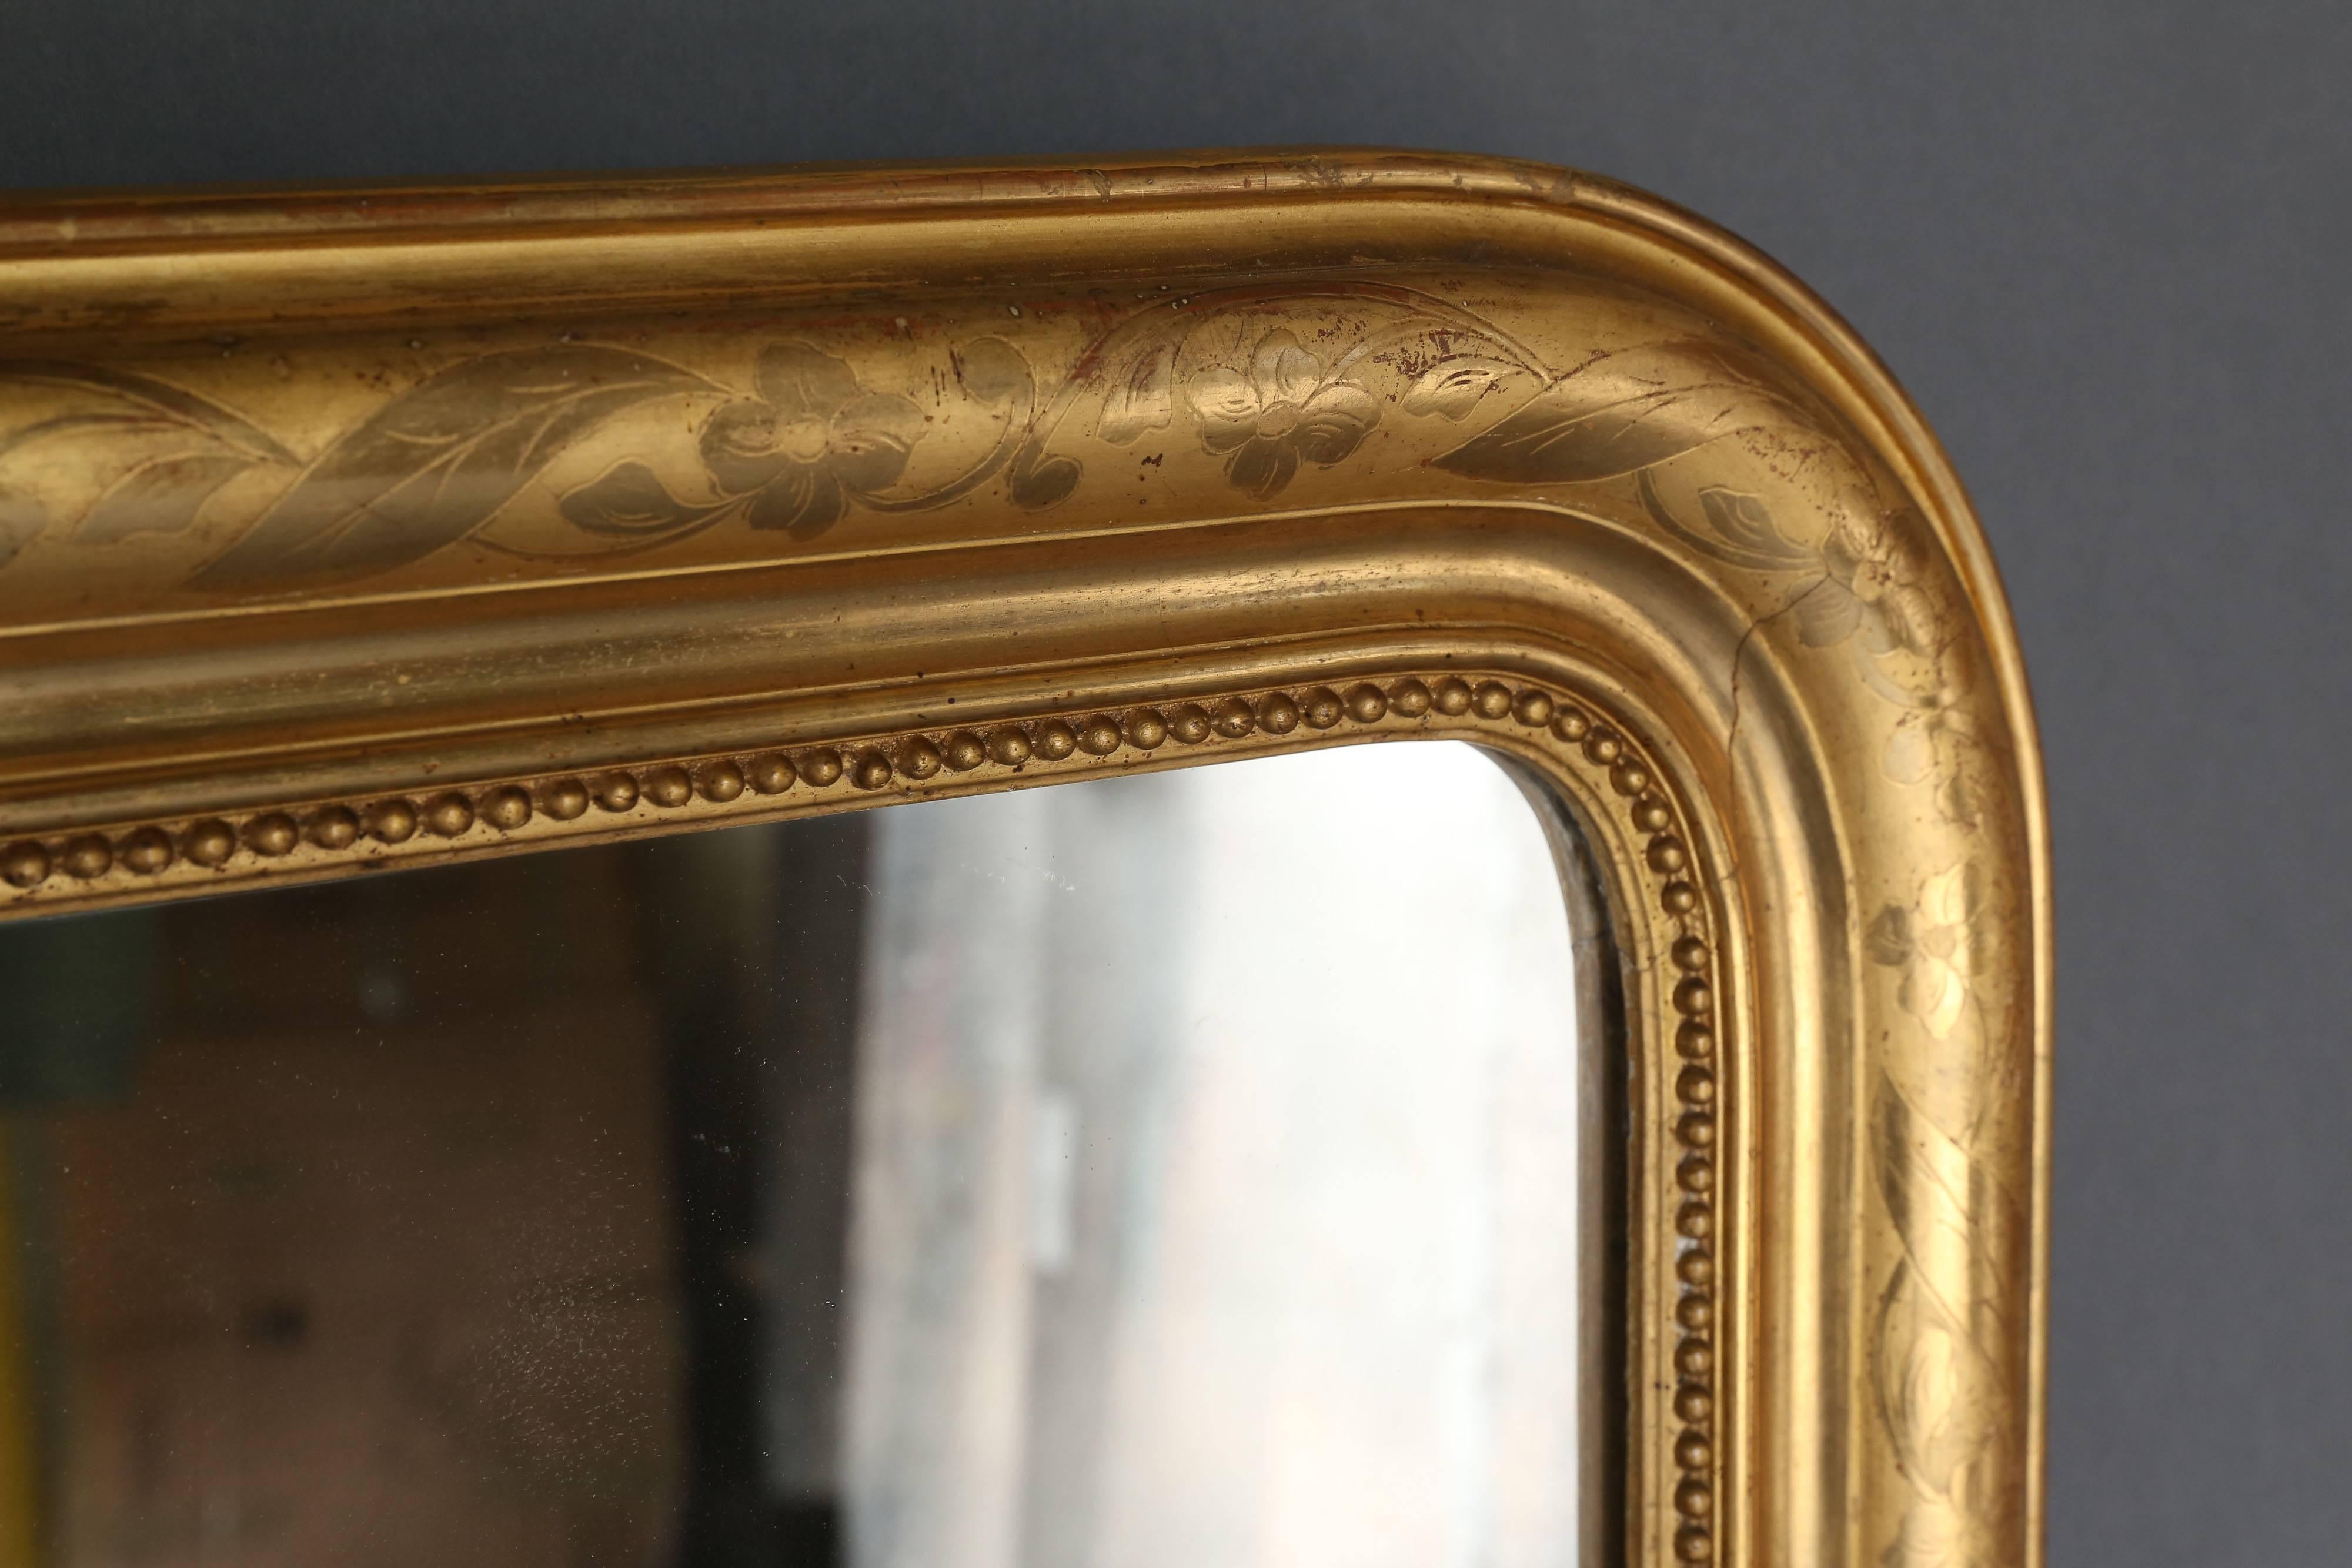 19th century Louis Philippe gilt mirror with pearl detail along the inside perimeter. Gilt is etched with a floral design that meanders along the perimeter. Original mercury glass.